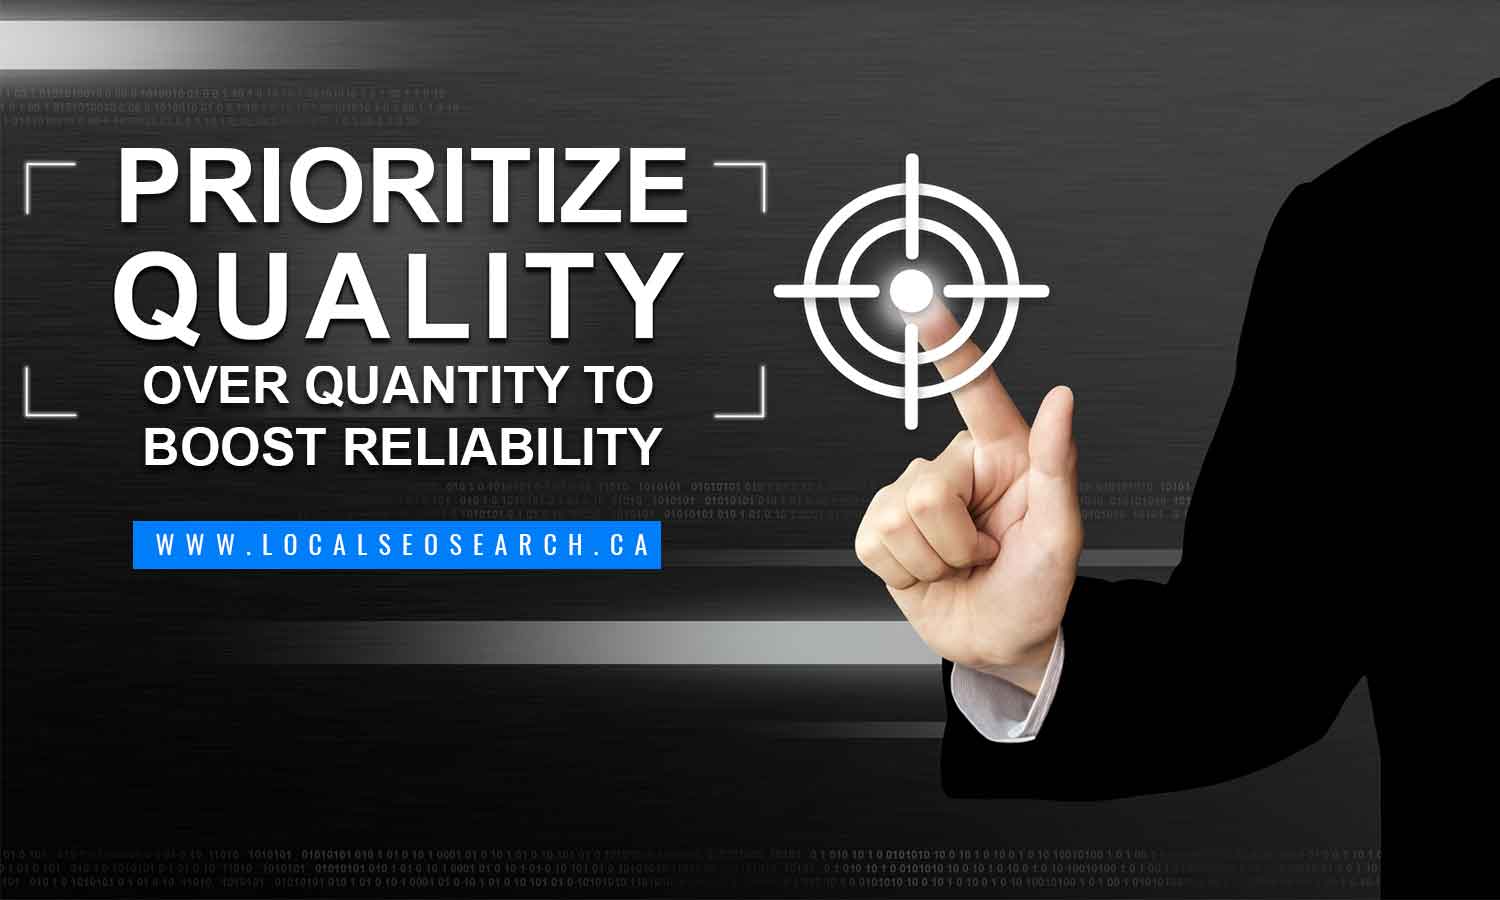 Prioritize quality over quantity to boost reliability